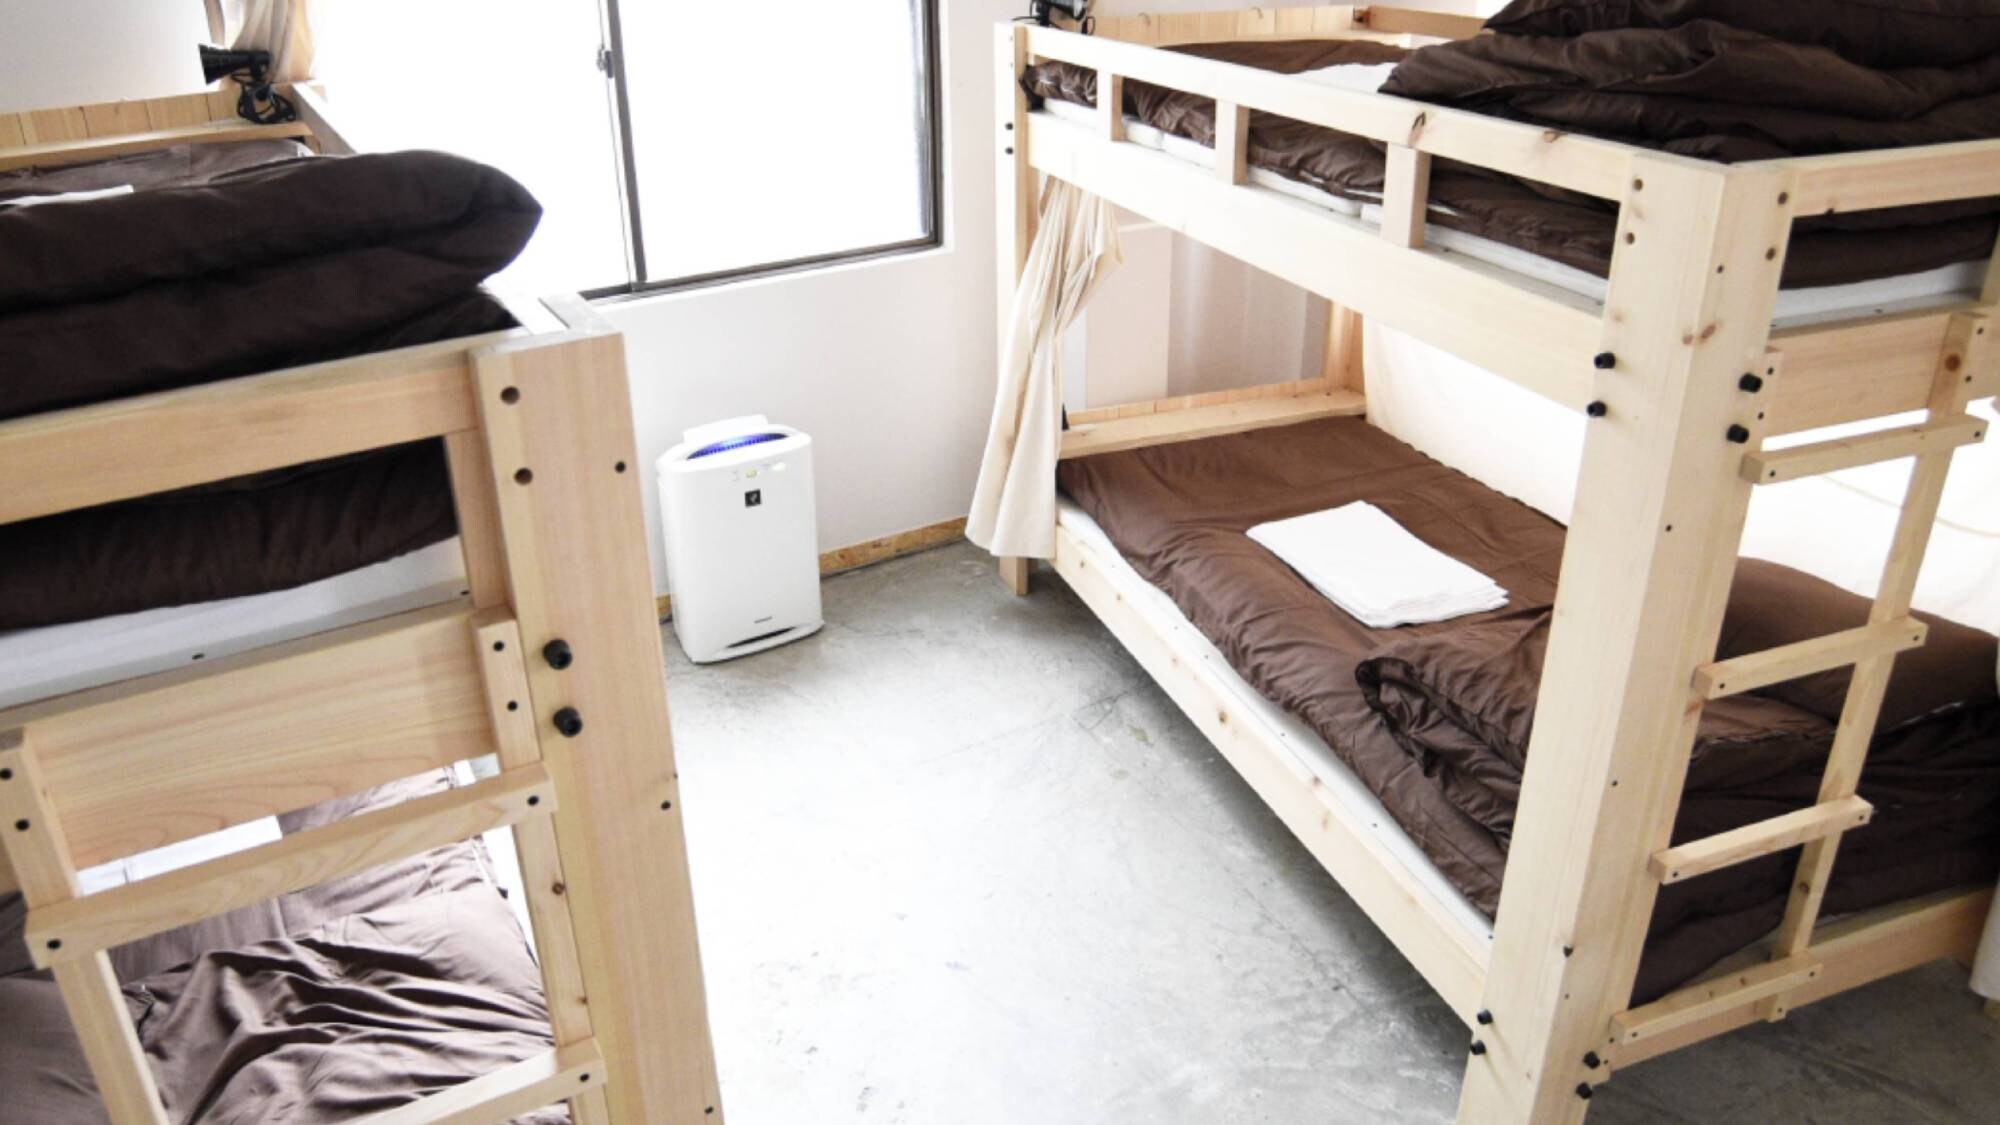 ・ [Example of female-only dormitory] One person can stay